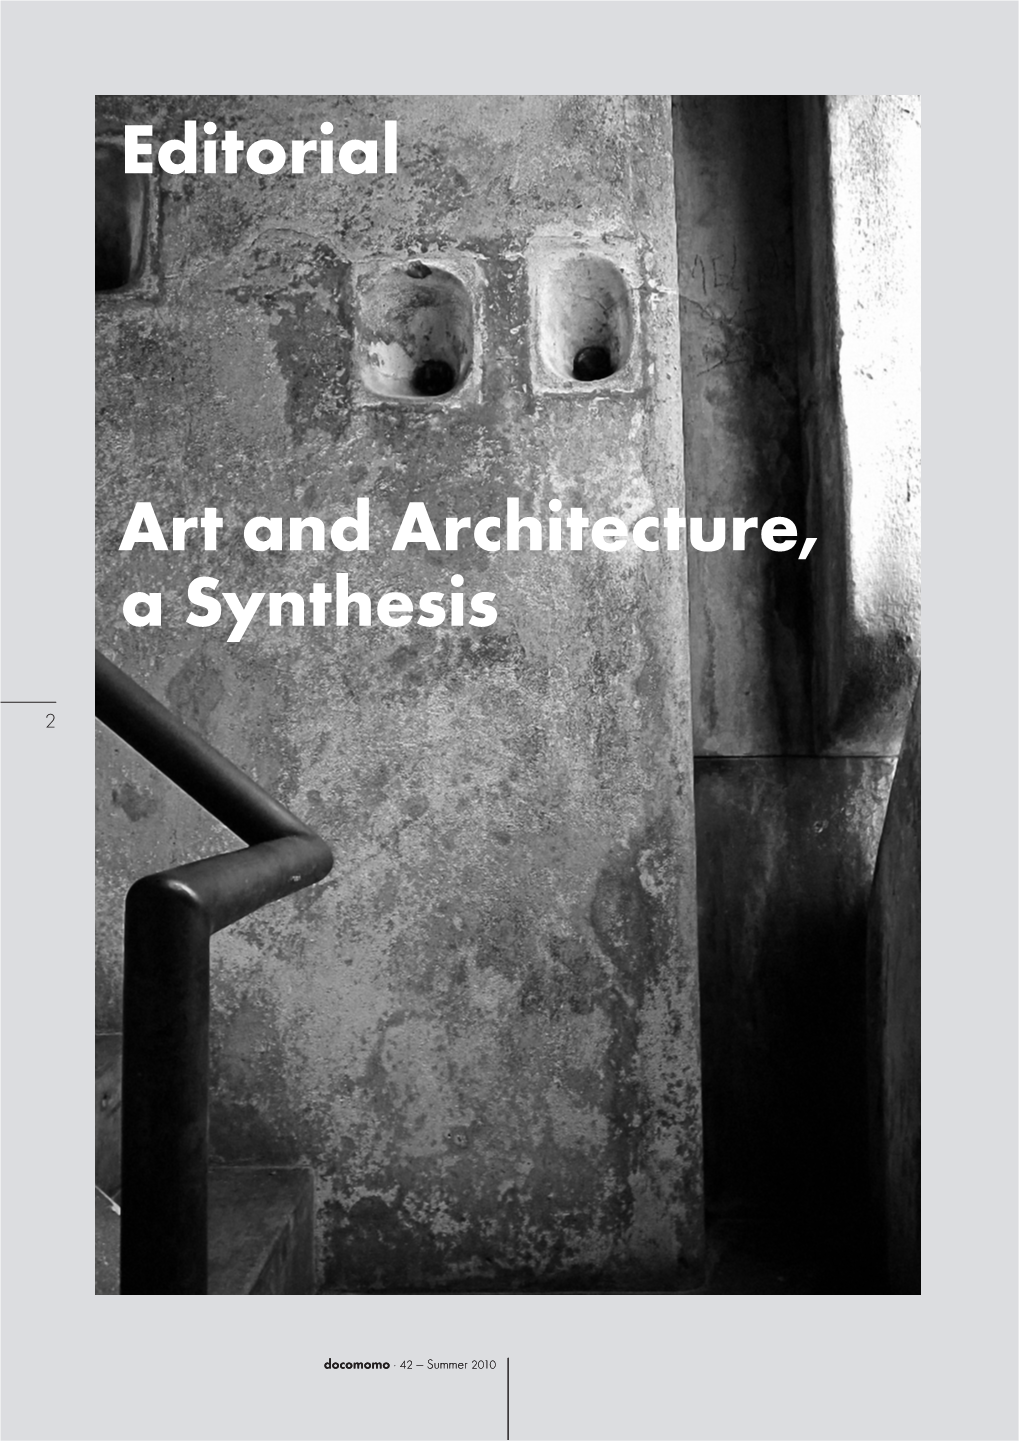 Editorial Art and Architecture, a Synthesis